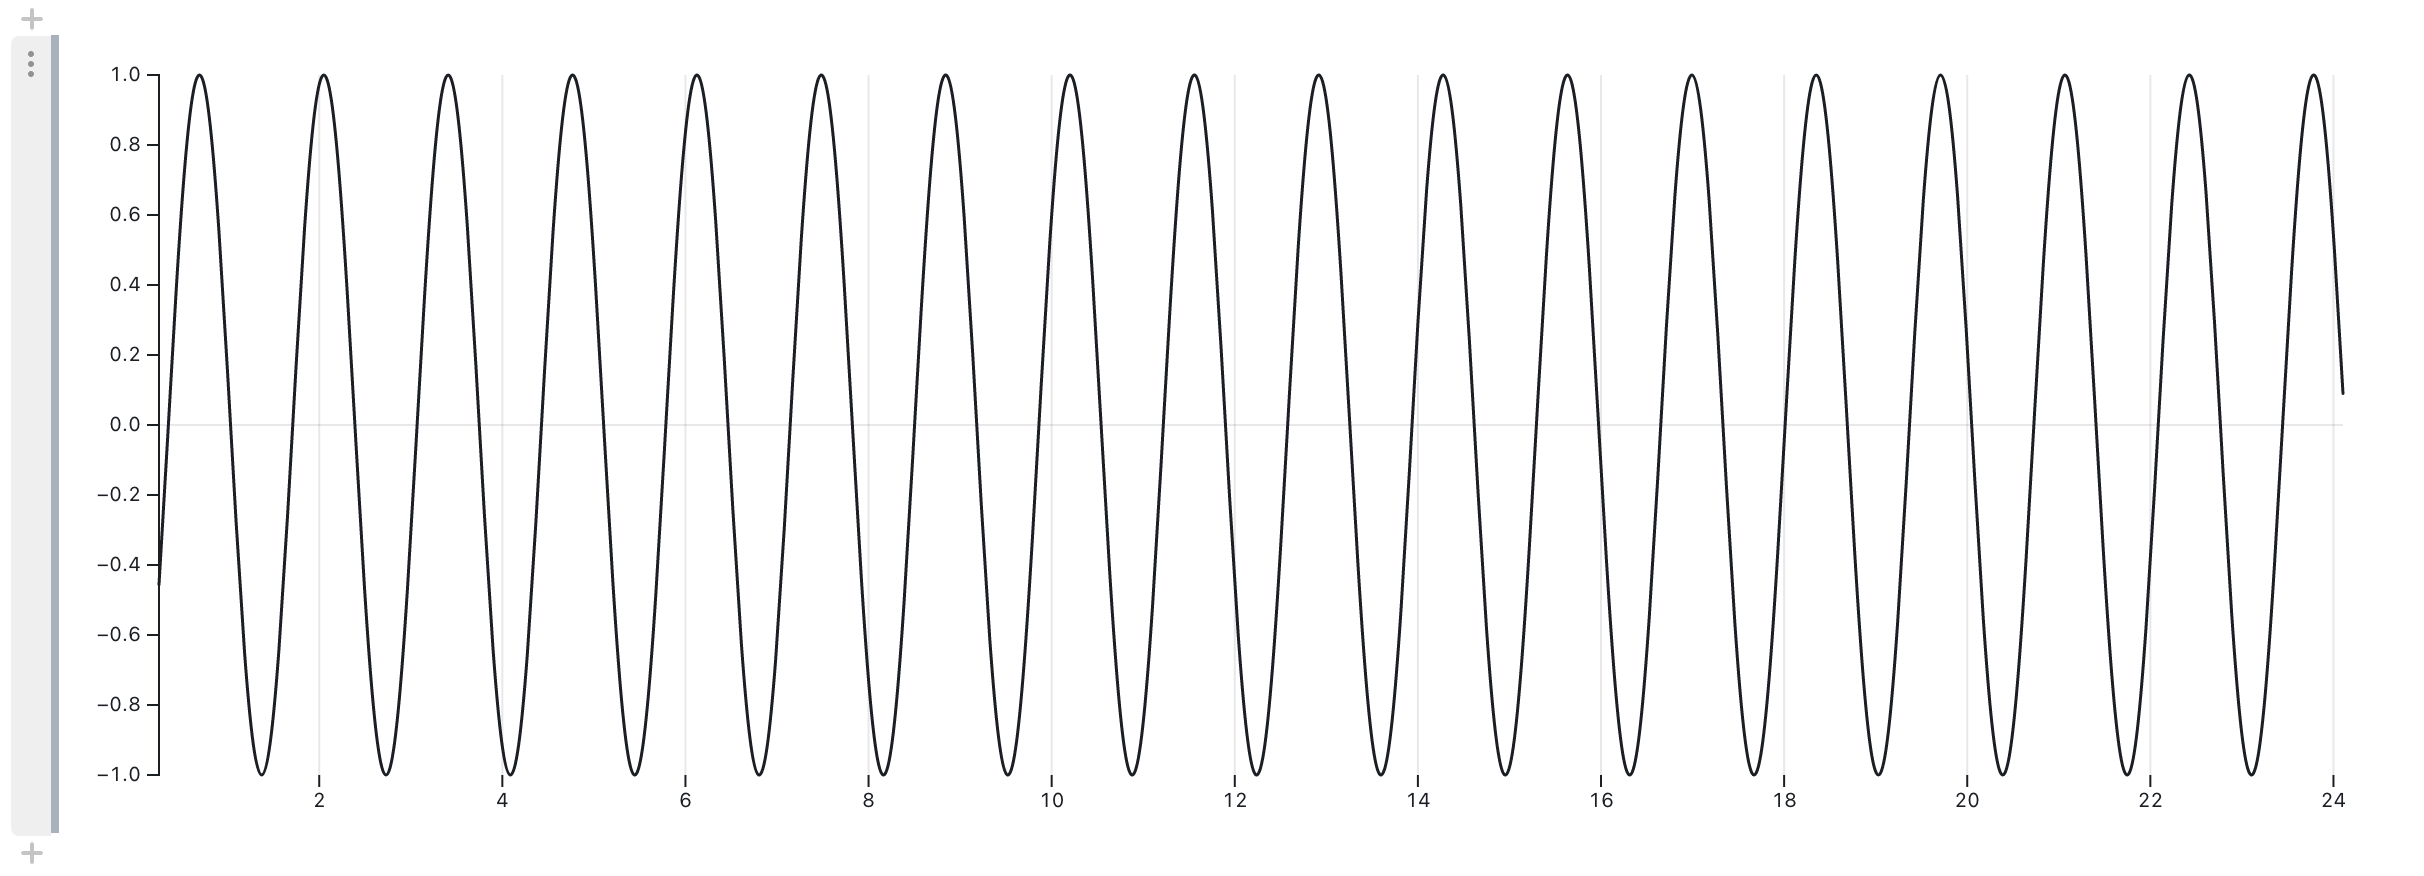 A very turbulent sine wave with high frequency and high amplitude